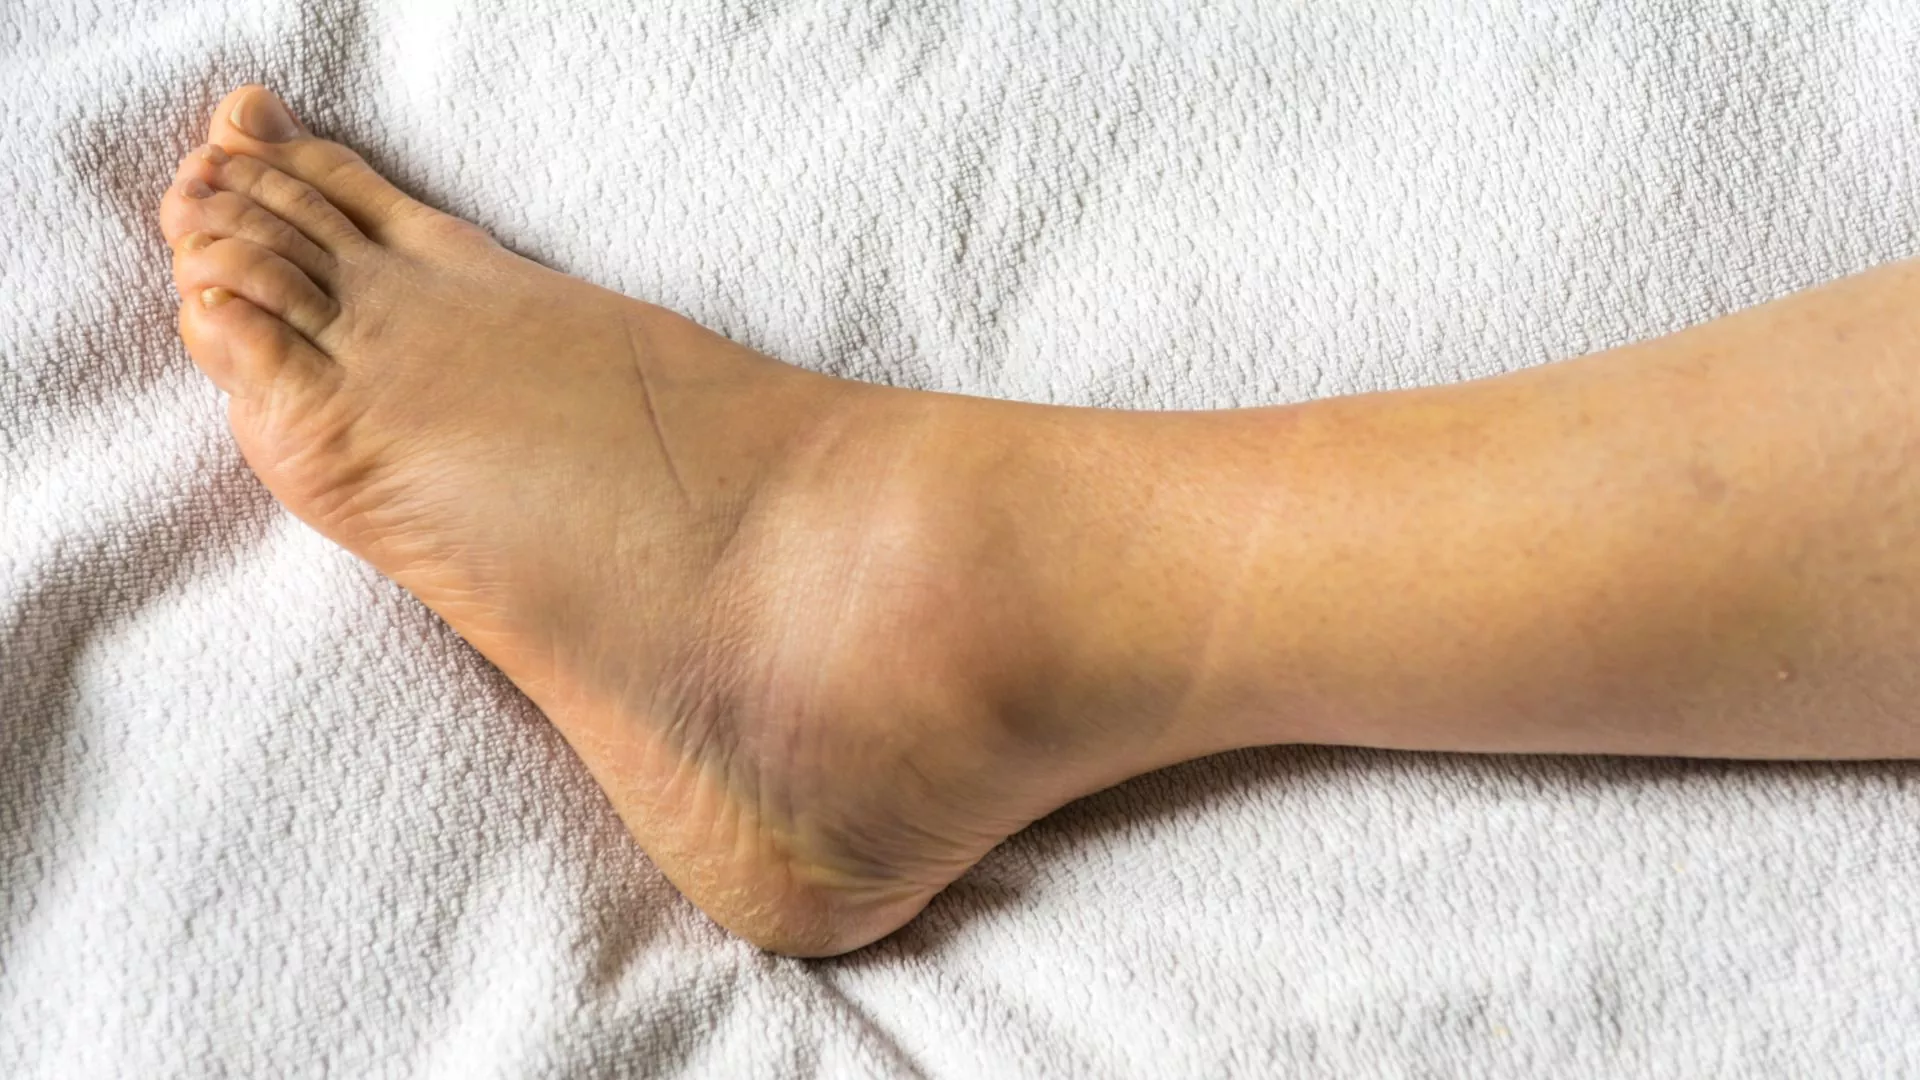 Common Ankle Injuries and Their Treatment You Must Know